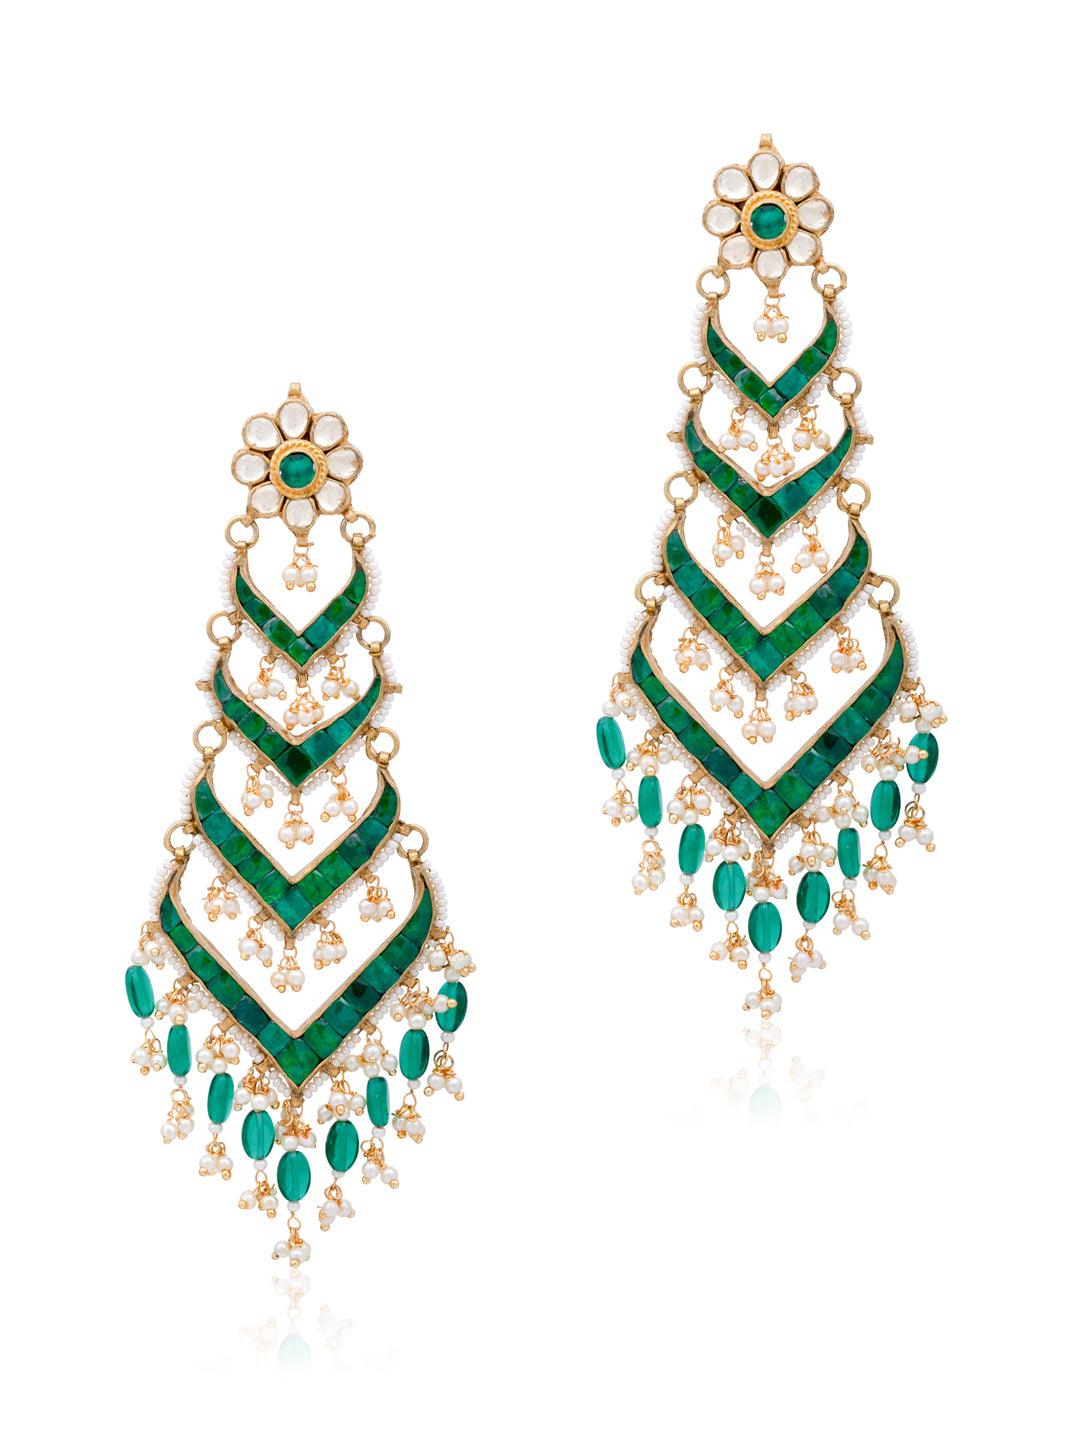 Layers Of Green Chandleier Earrings - Curio Cottage 